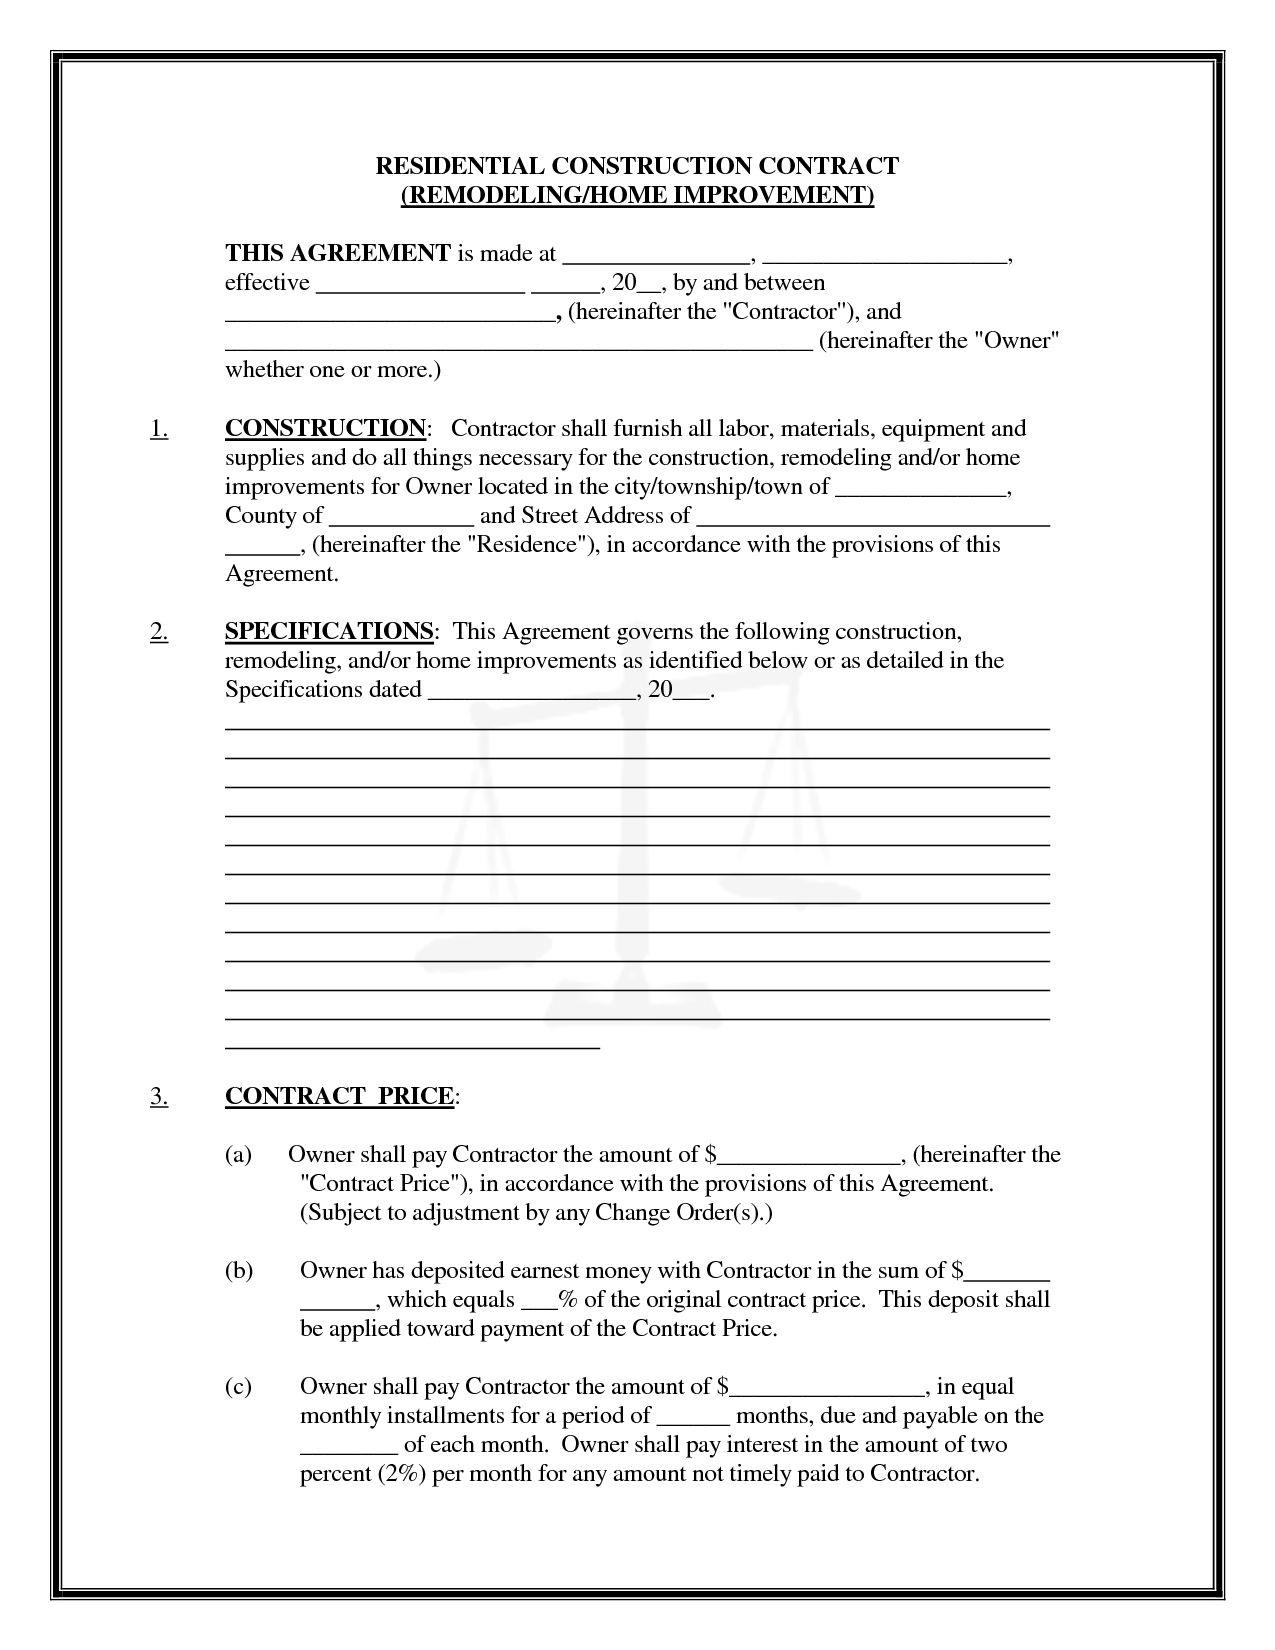 Pics Of Residential Construction Contracts | Residential - Free Printable Home Improvement Contracts